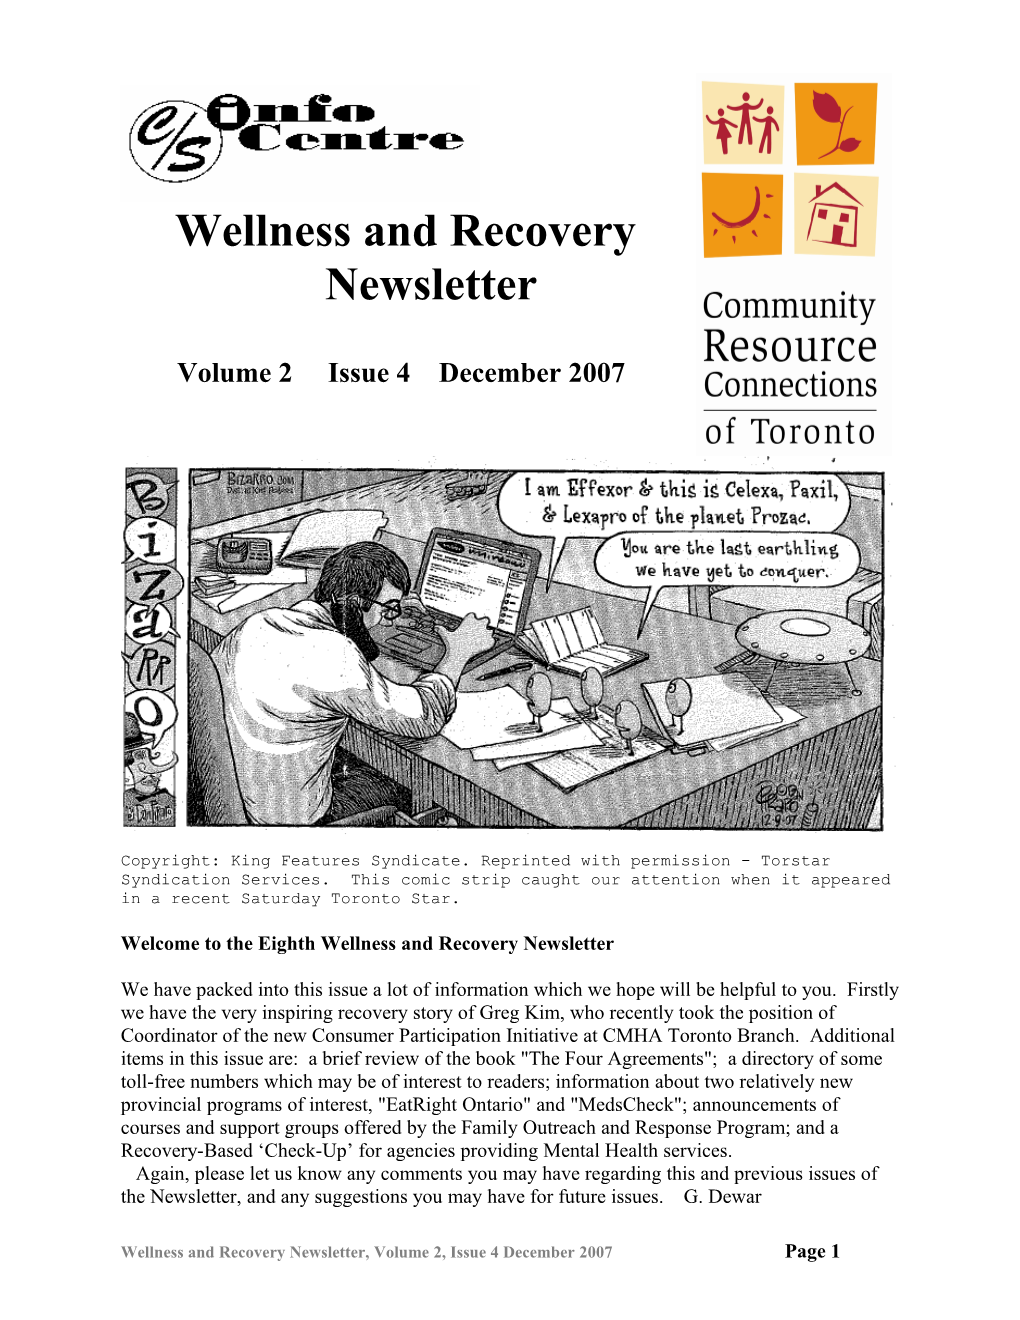 Wellness and Recovery Newsletter Vol 1 Issue 1